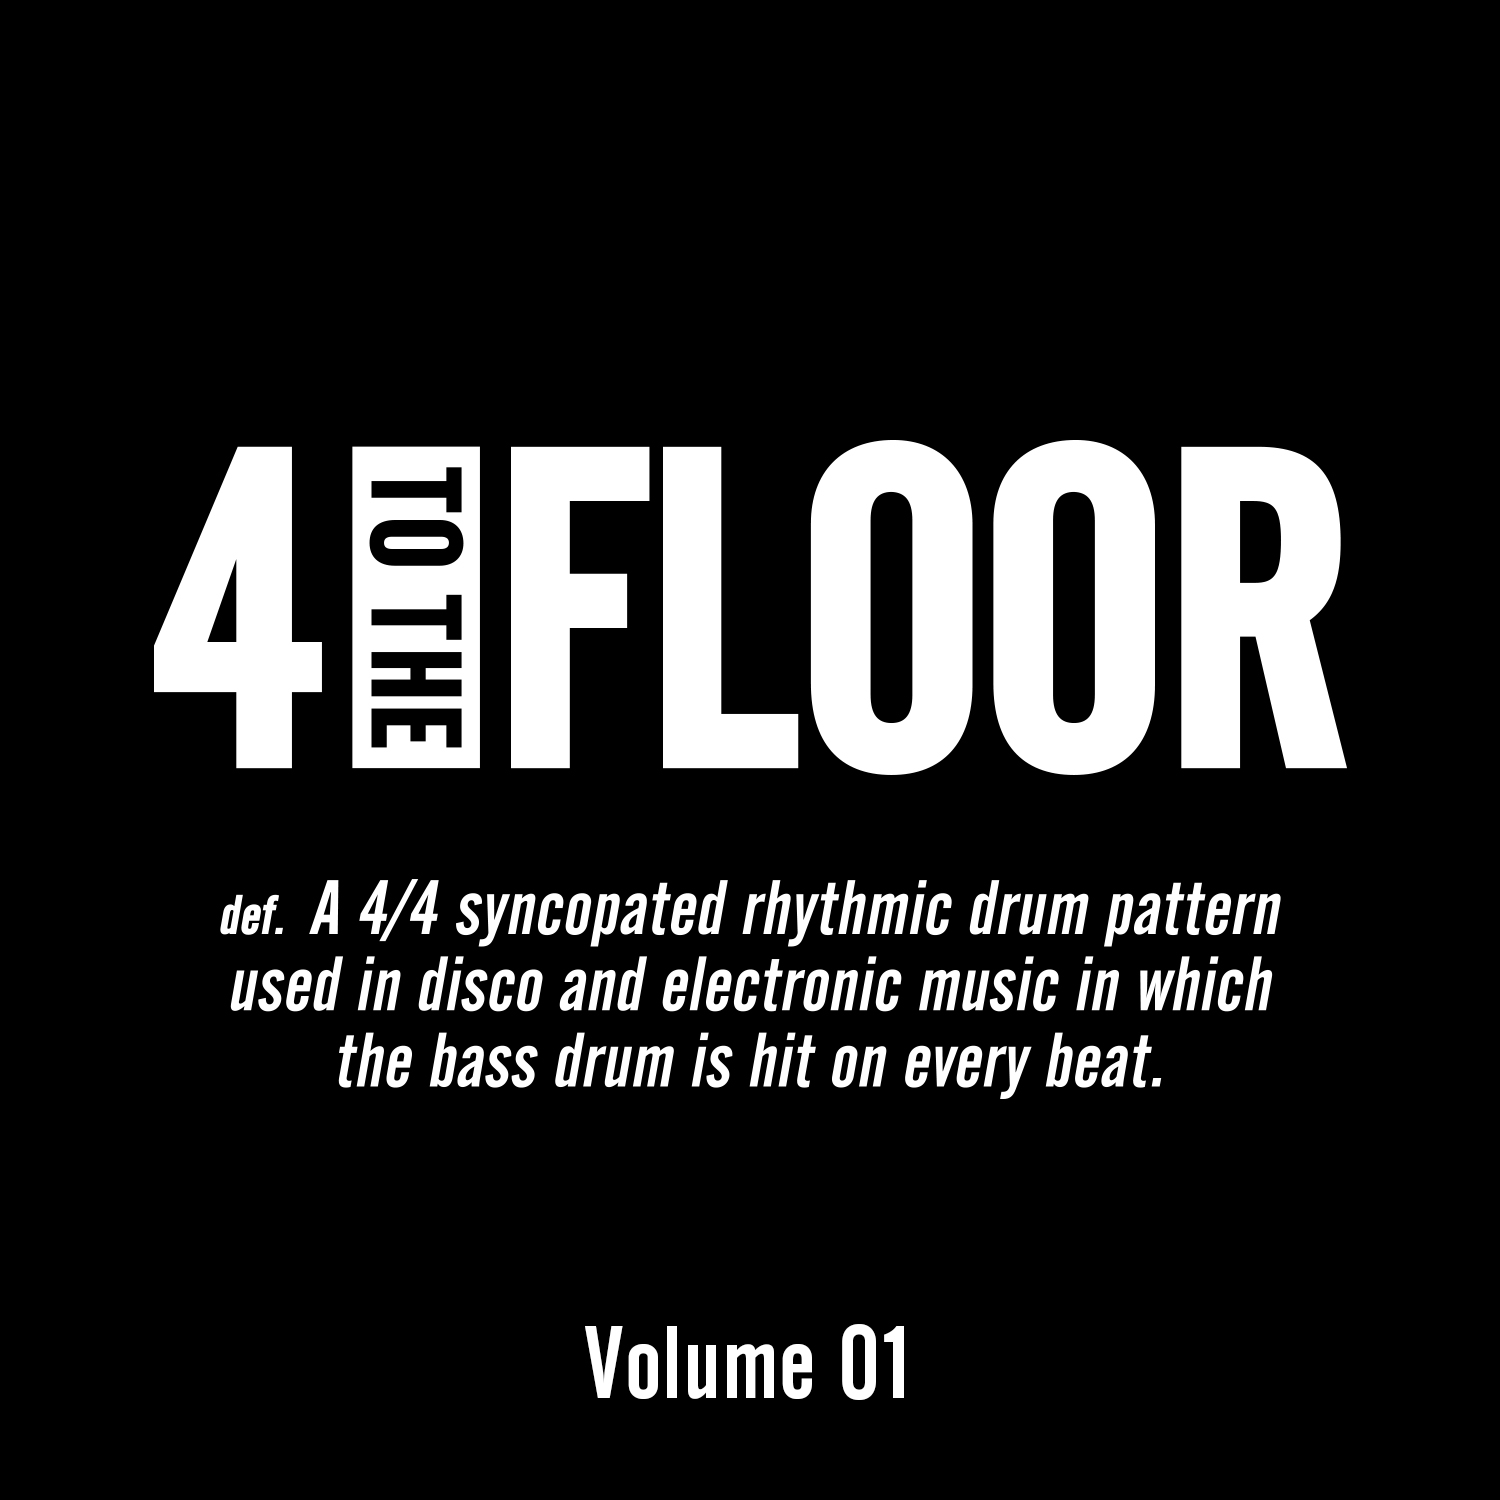 4 to the floor feat. 4 To the Floor. Four to the Floor. Four on the Floor Beat. Defected records.